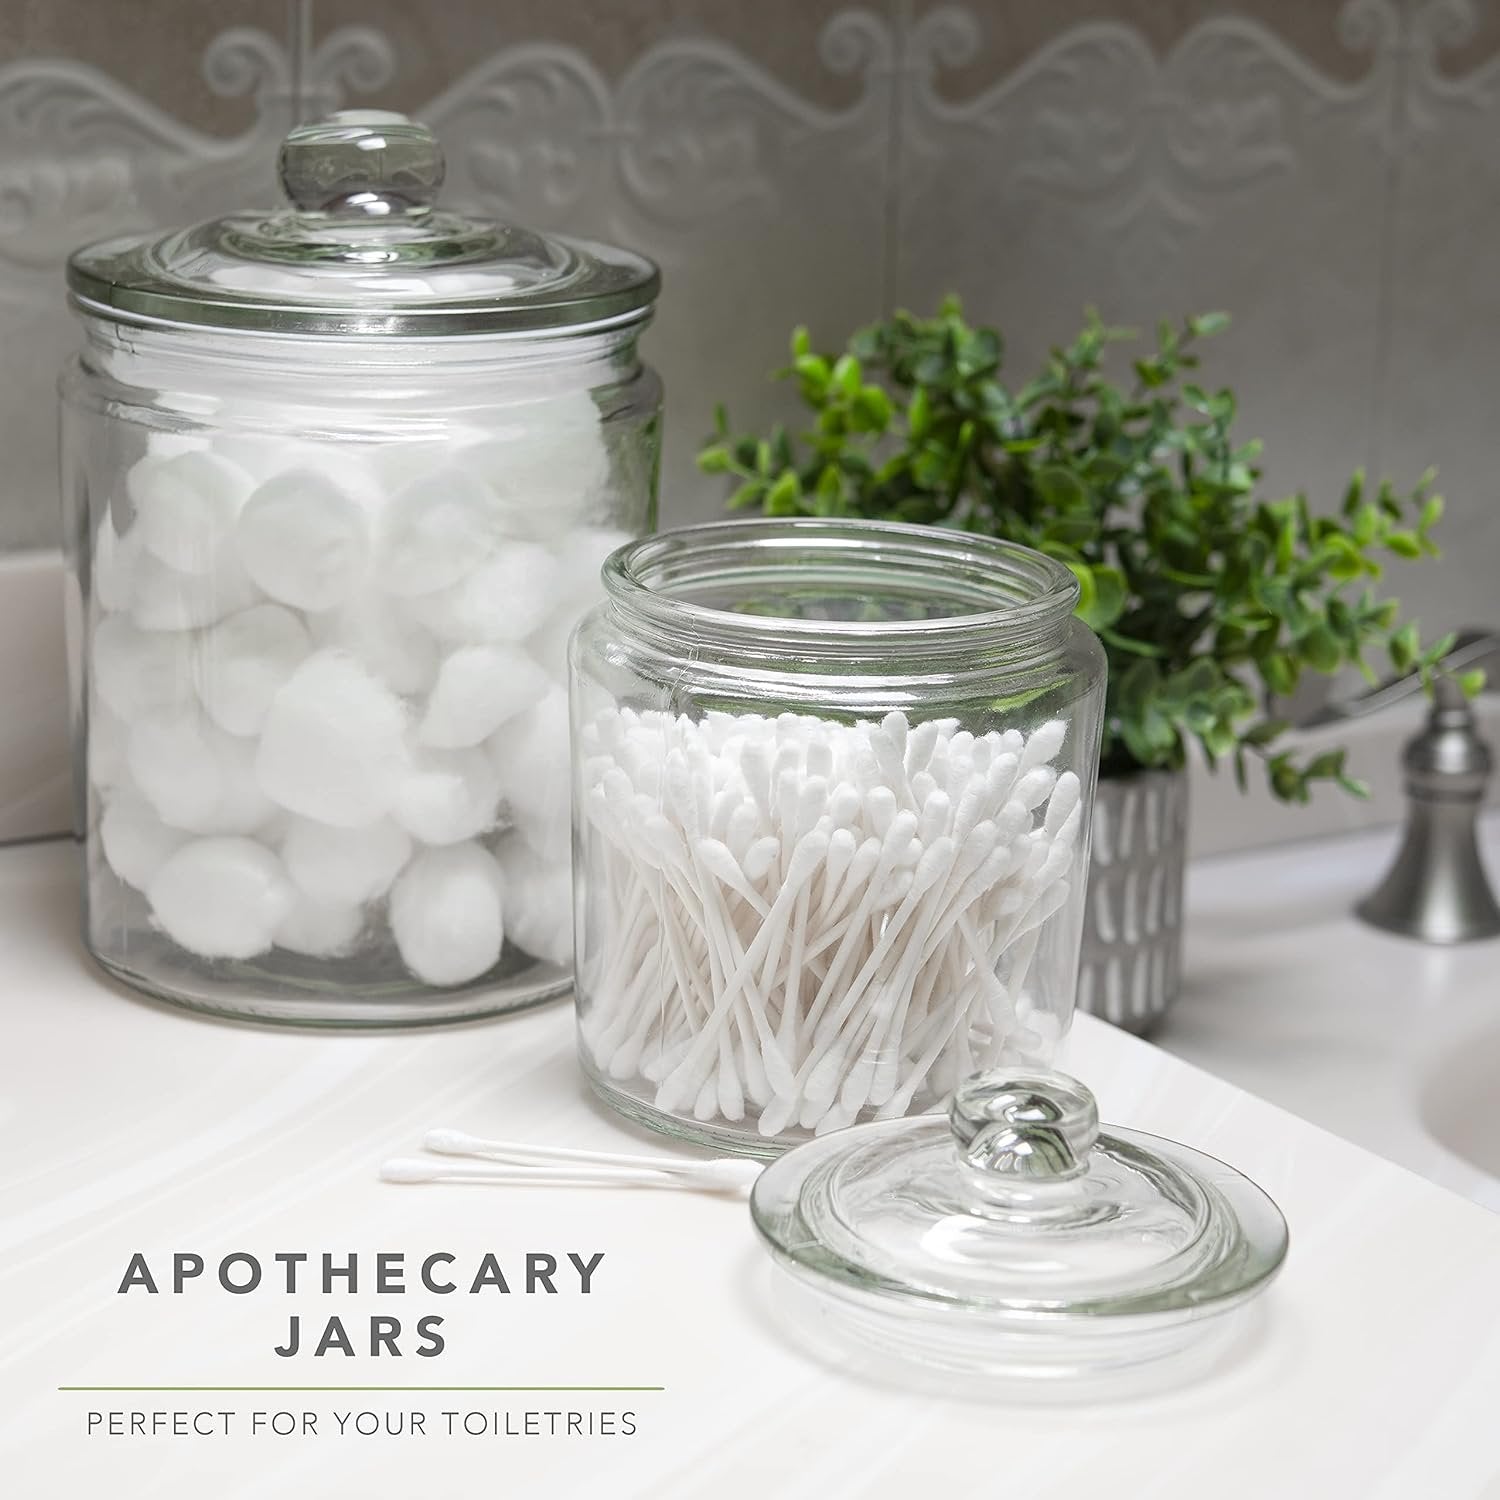 GADGETWIZ Glass Cookie Jar -2x 1/2 Gallon (64oz) & 1/4Gallon (32oz) - Glass Apothecary Jars With Lids - Canister Sets For Kitchen Counter - Glass Candy Jars - Glass Canisters Set Of 4